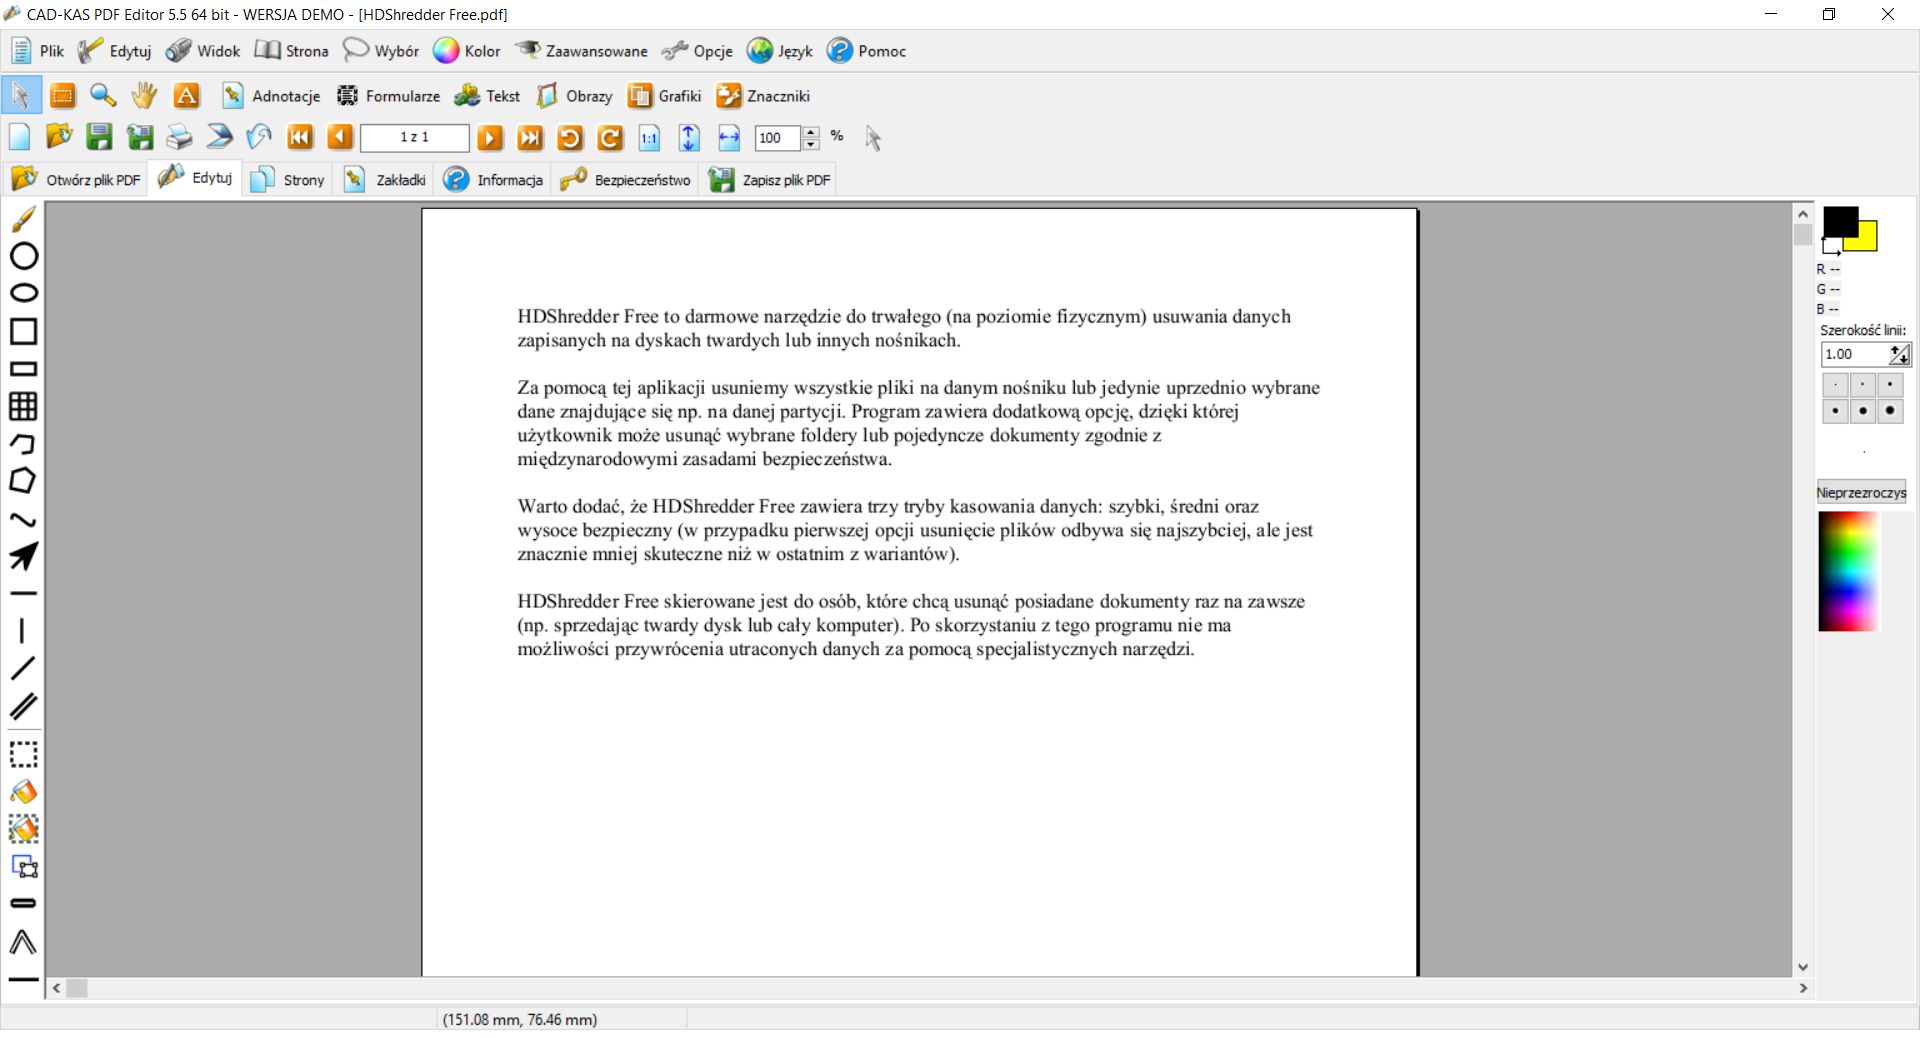 instal the new version for iphoneMaster PDF Editor 5.9.50